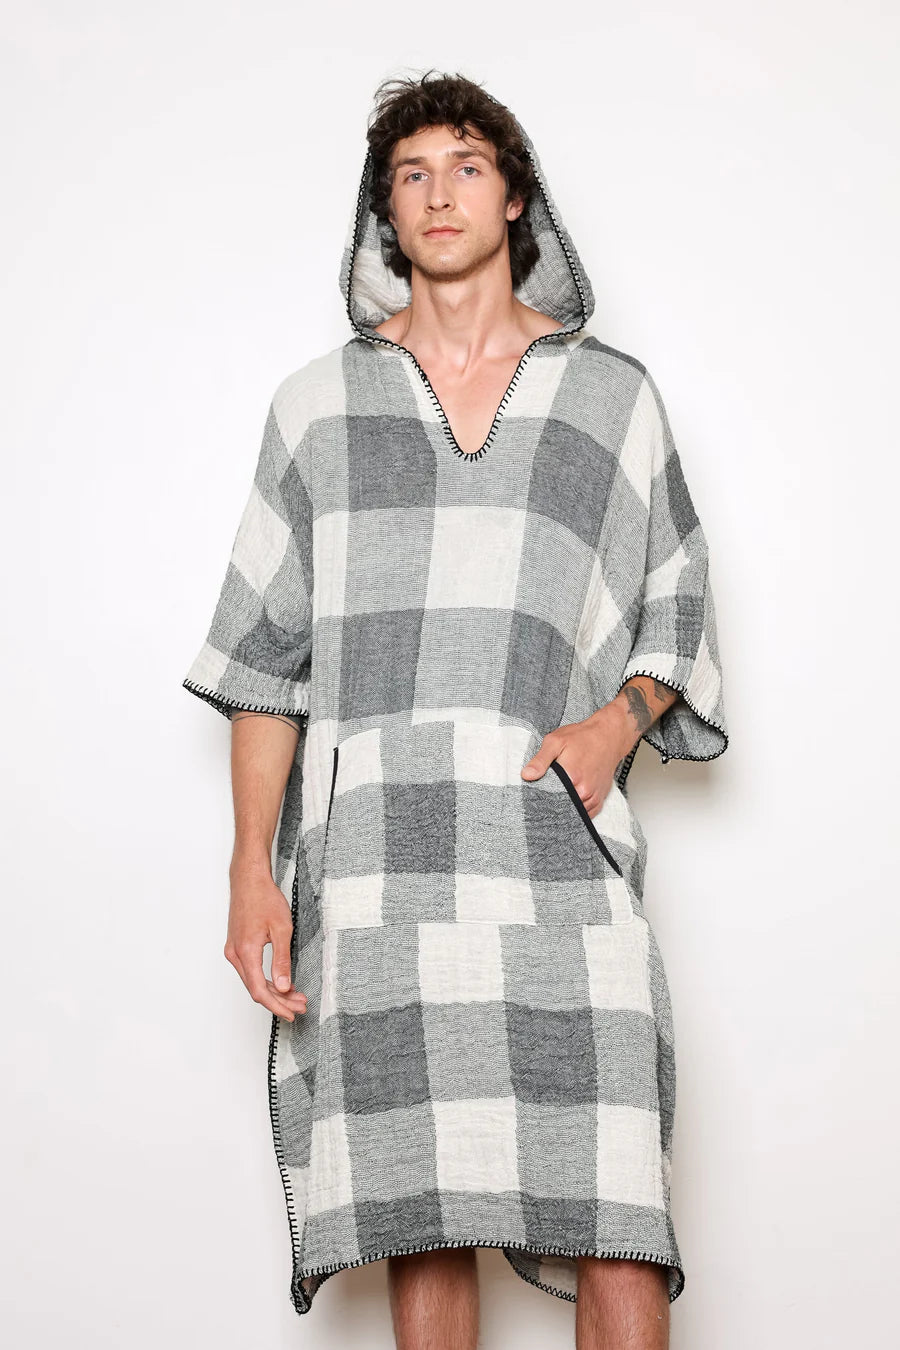 The Limited Edition Plaid Cocoon Poncho| Men's